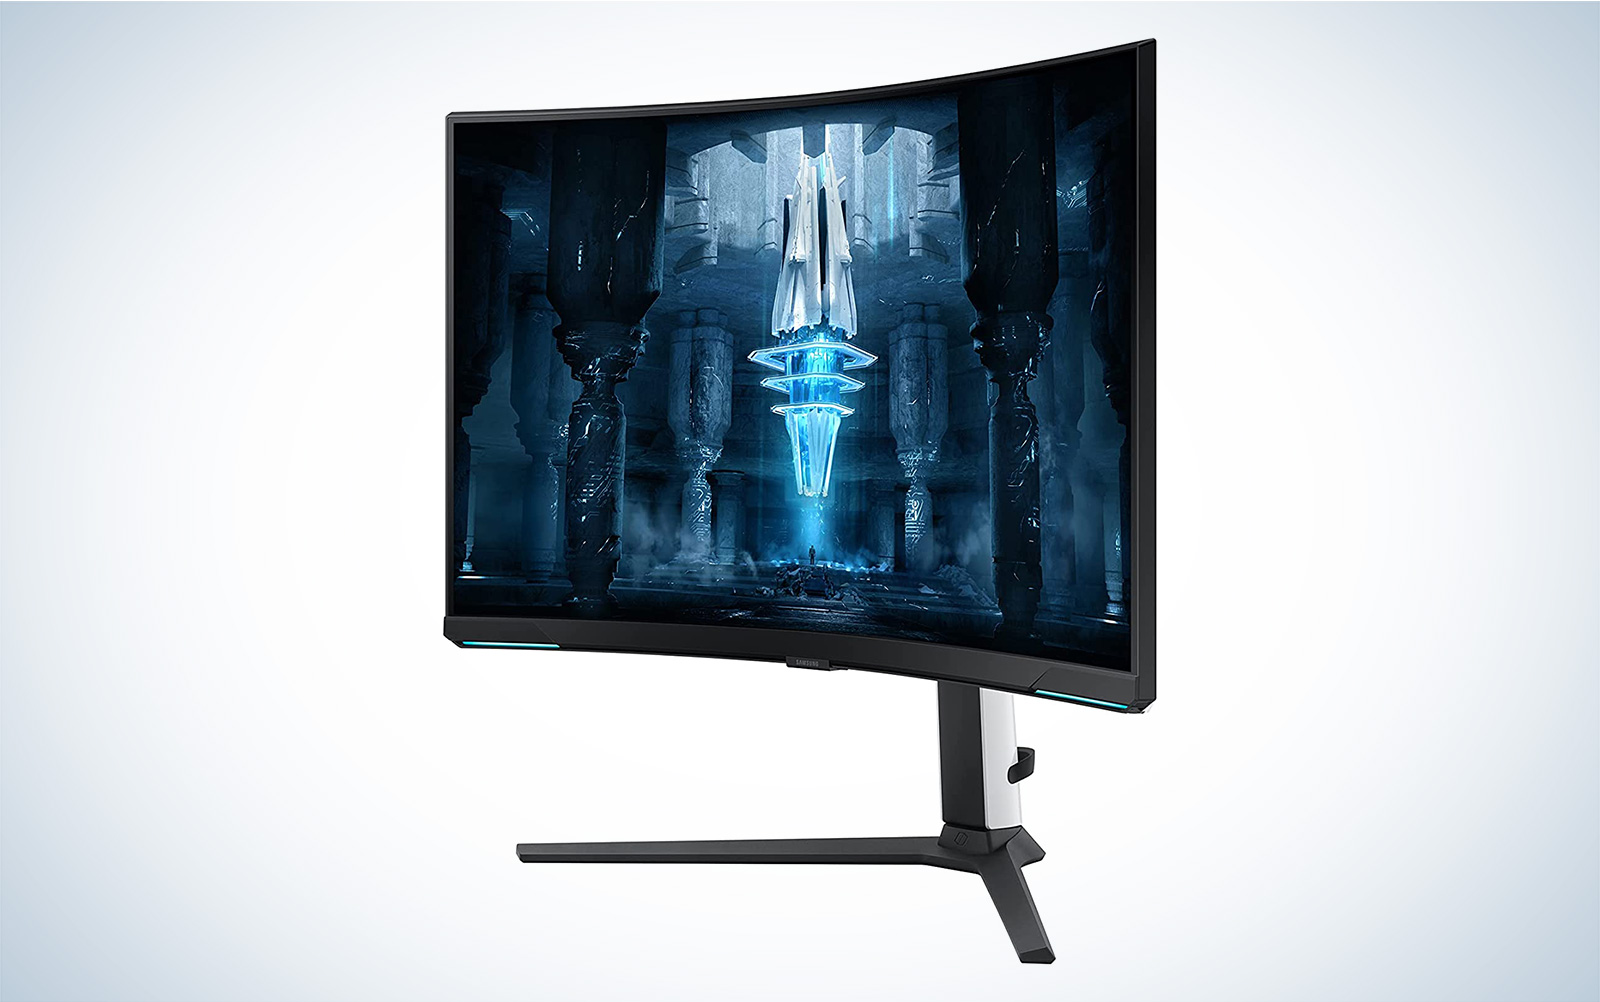 A gaming monitor specially for E-sports